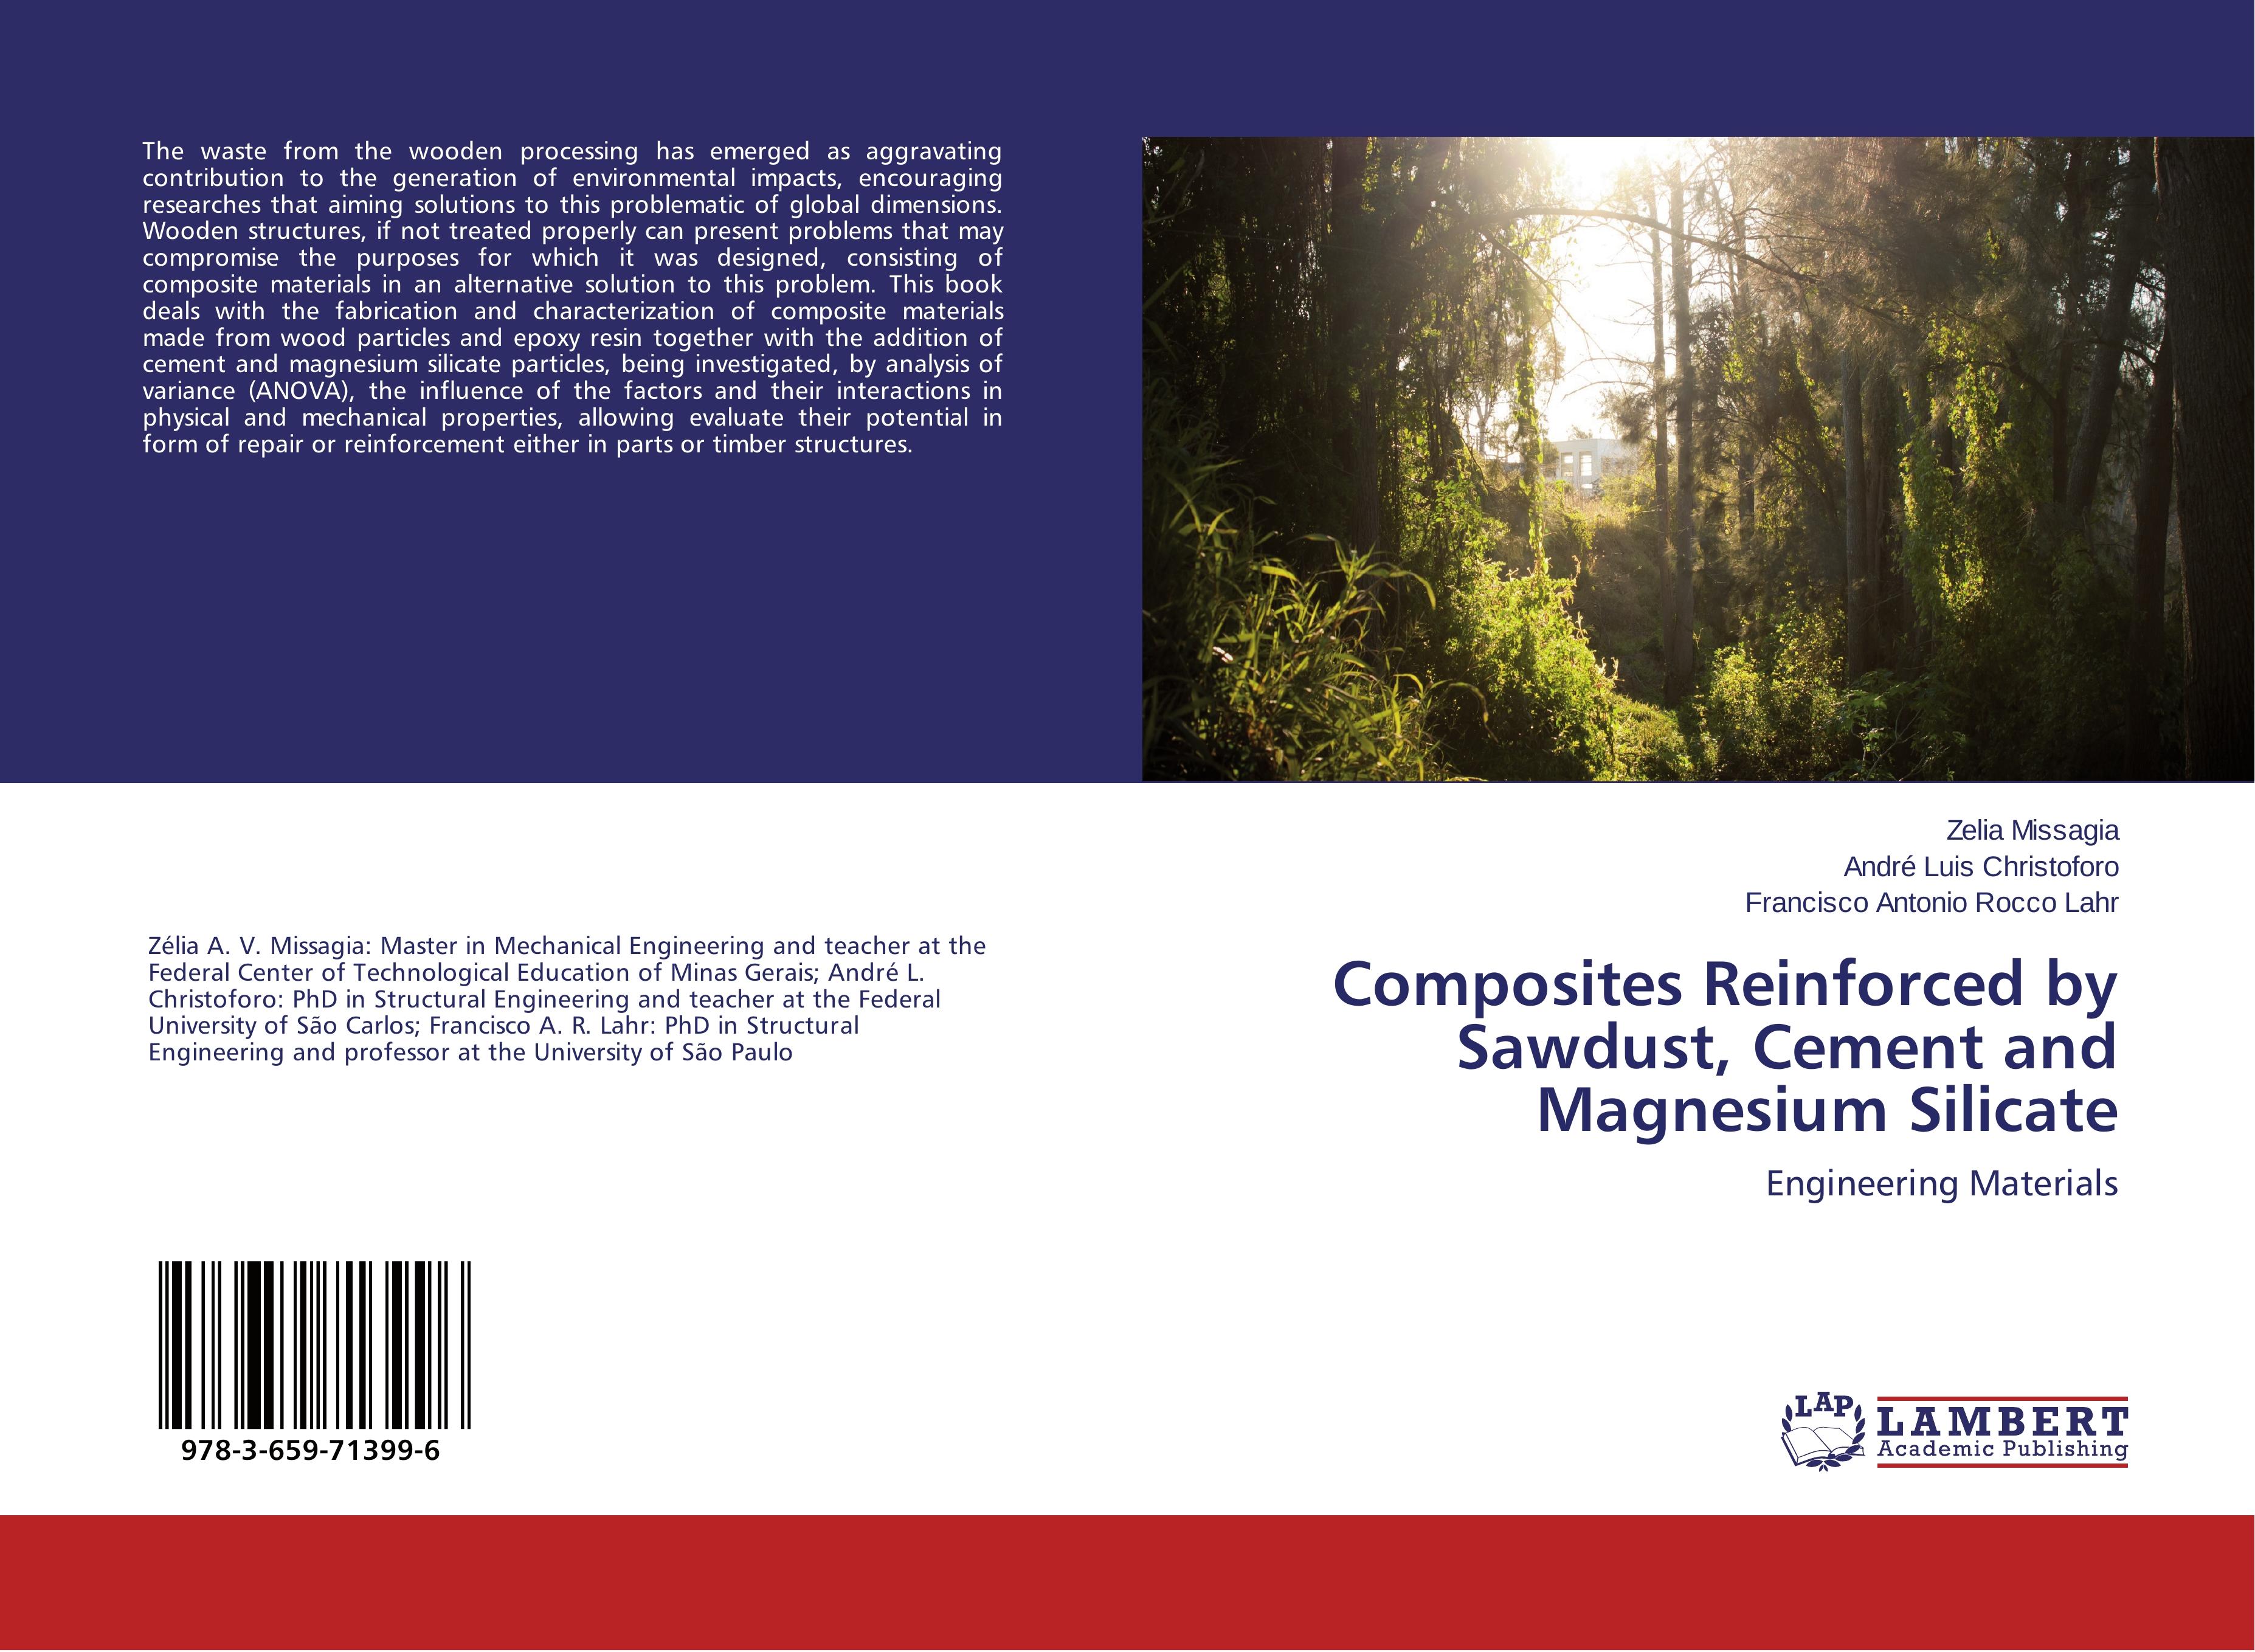 Composites Reinforced by Sawdust, Cement and Magnesium Silicate - Zelia Missagia André Luis Christoforo Francisco Antonio Rocco Lahr